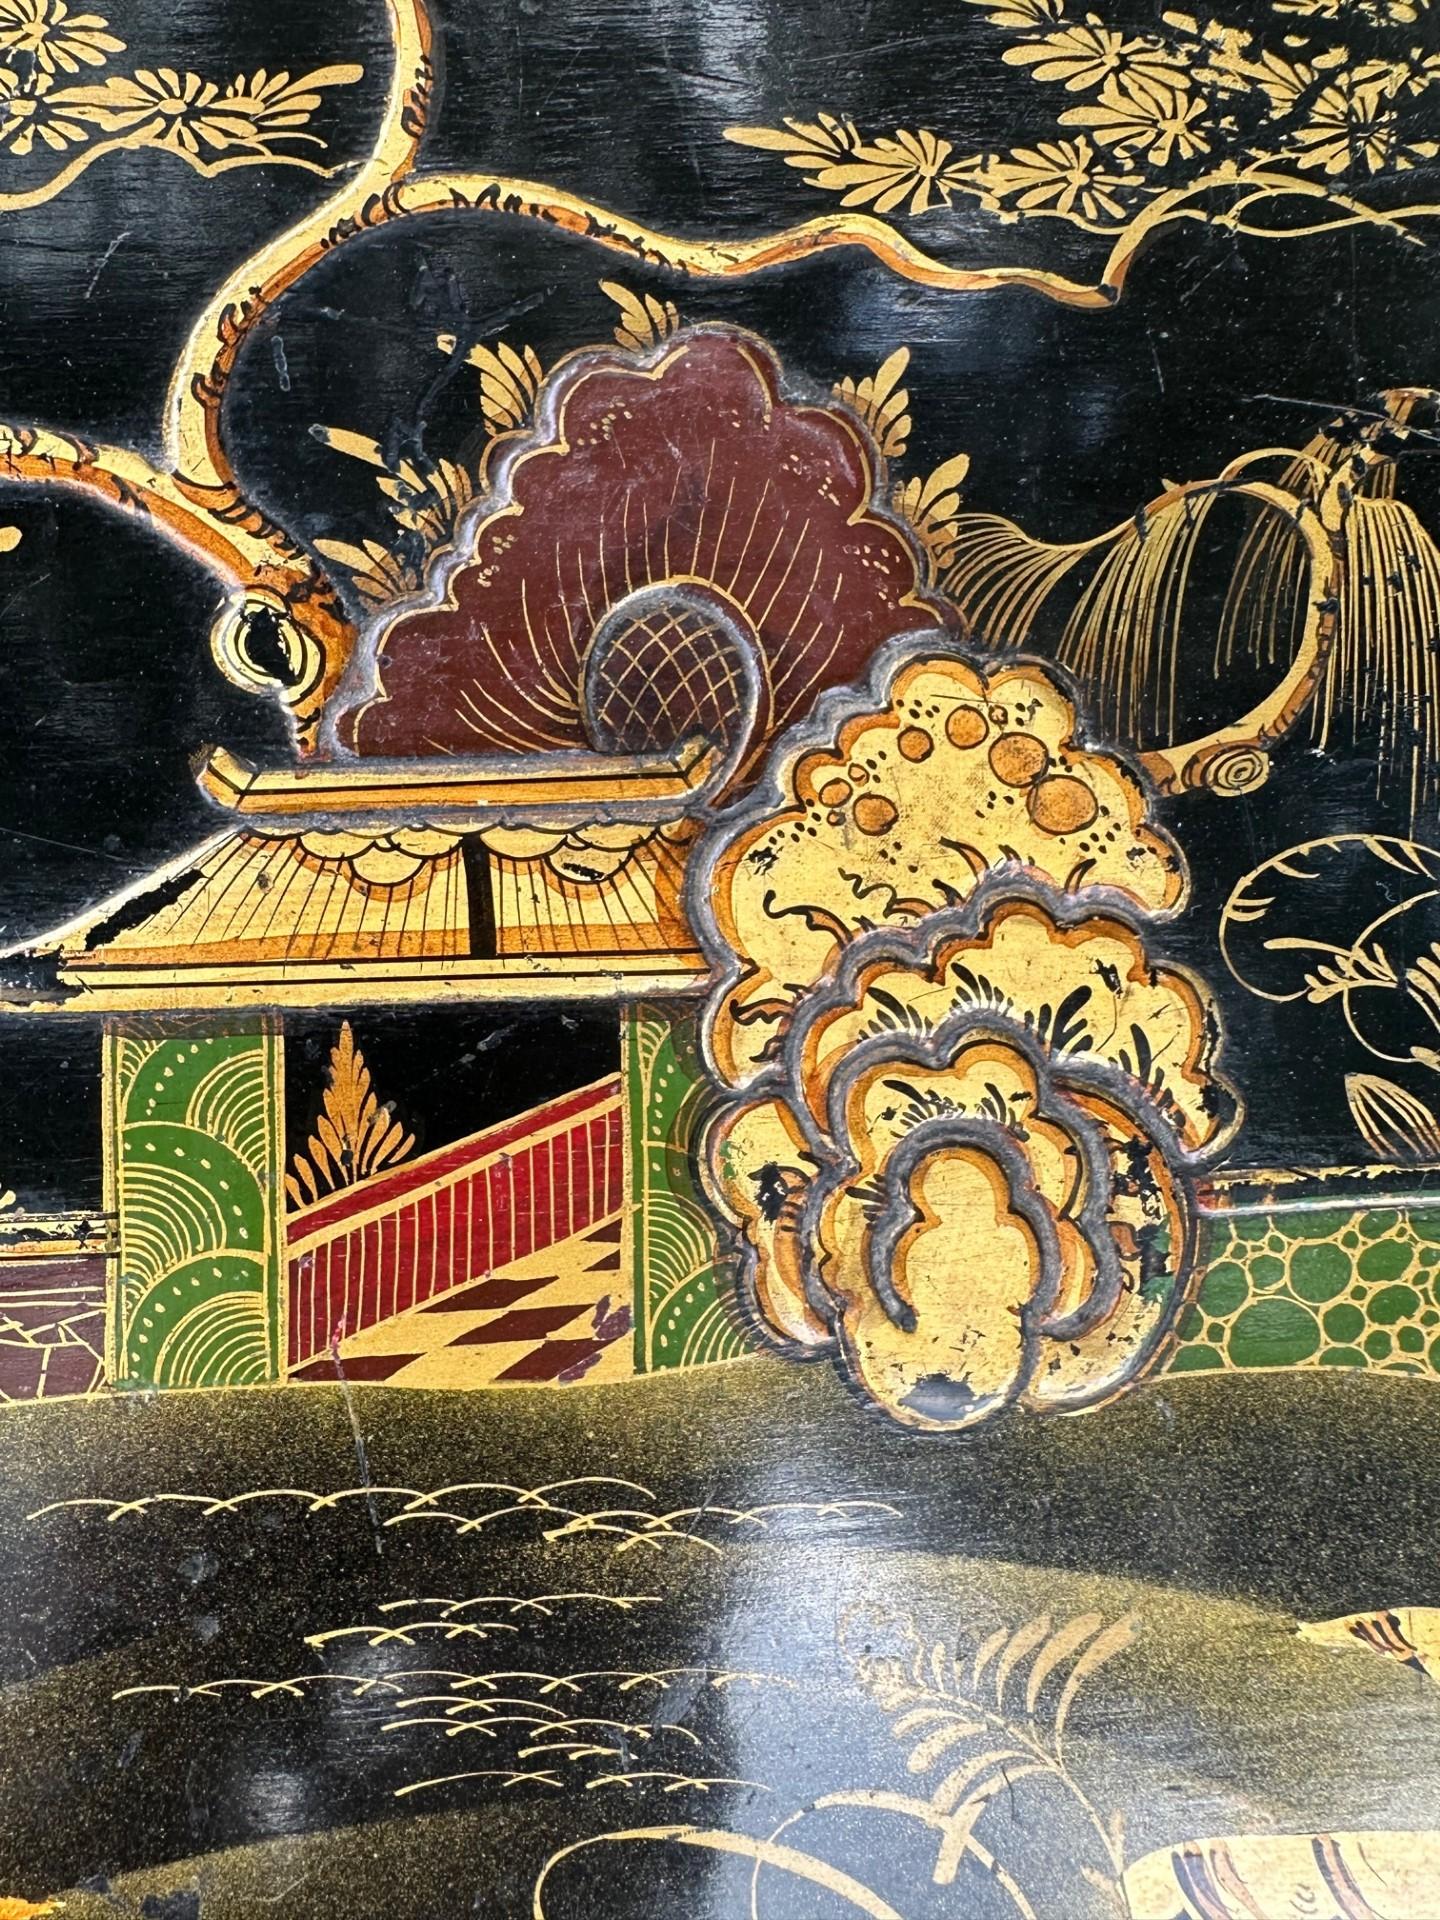 Antique Queen Ann Style with Raised Lacquer Chinoiserie Side Table

Charming side table from the early 20th century is hand decorated with gold gilt scenes of Asian landscape and figures on a black ground. The Queen Ann style table has great lines